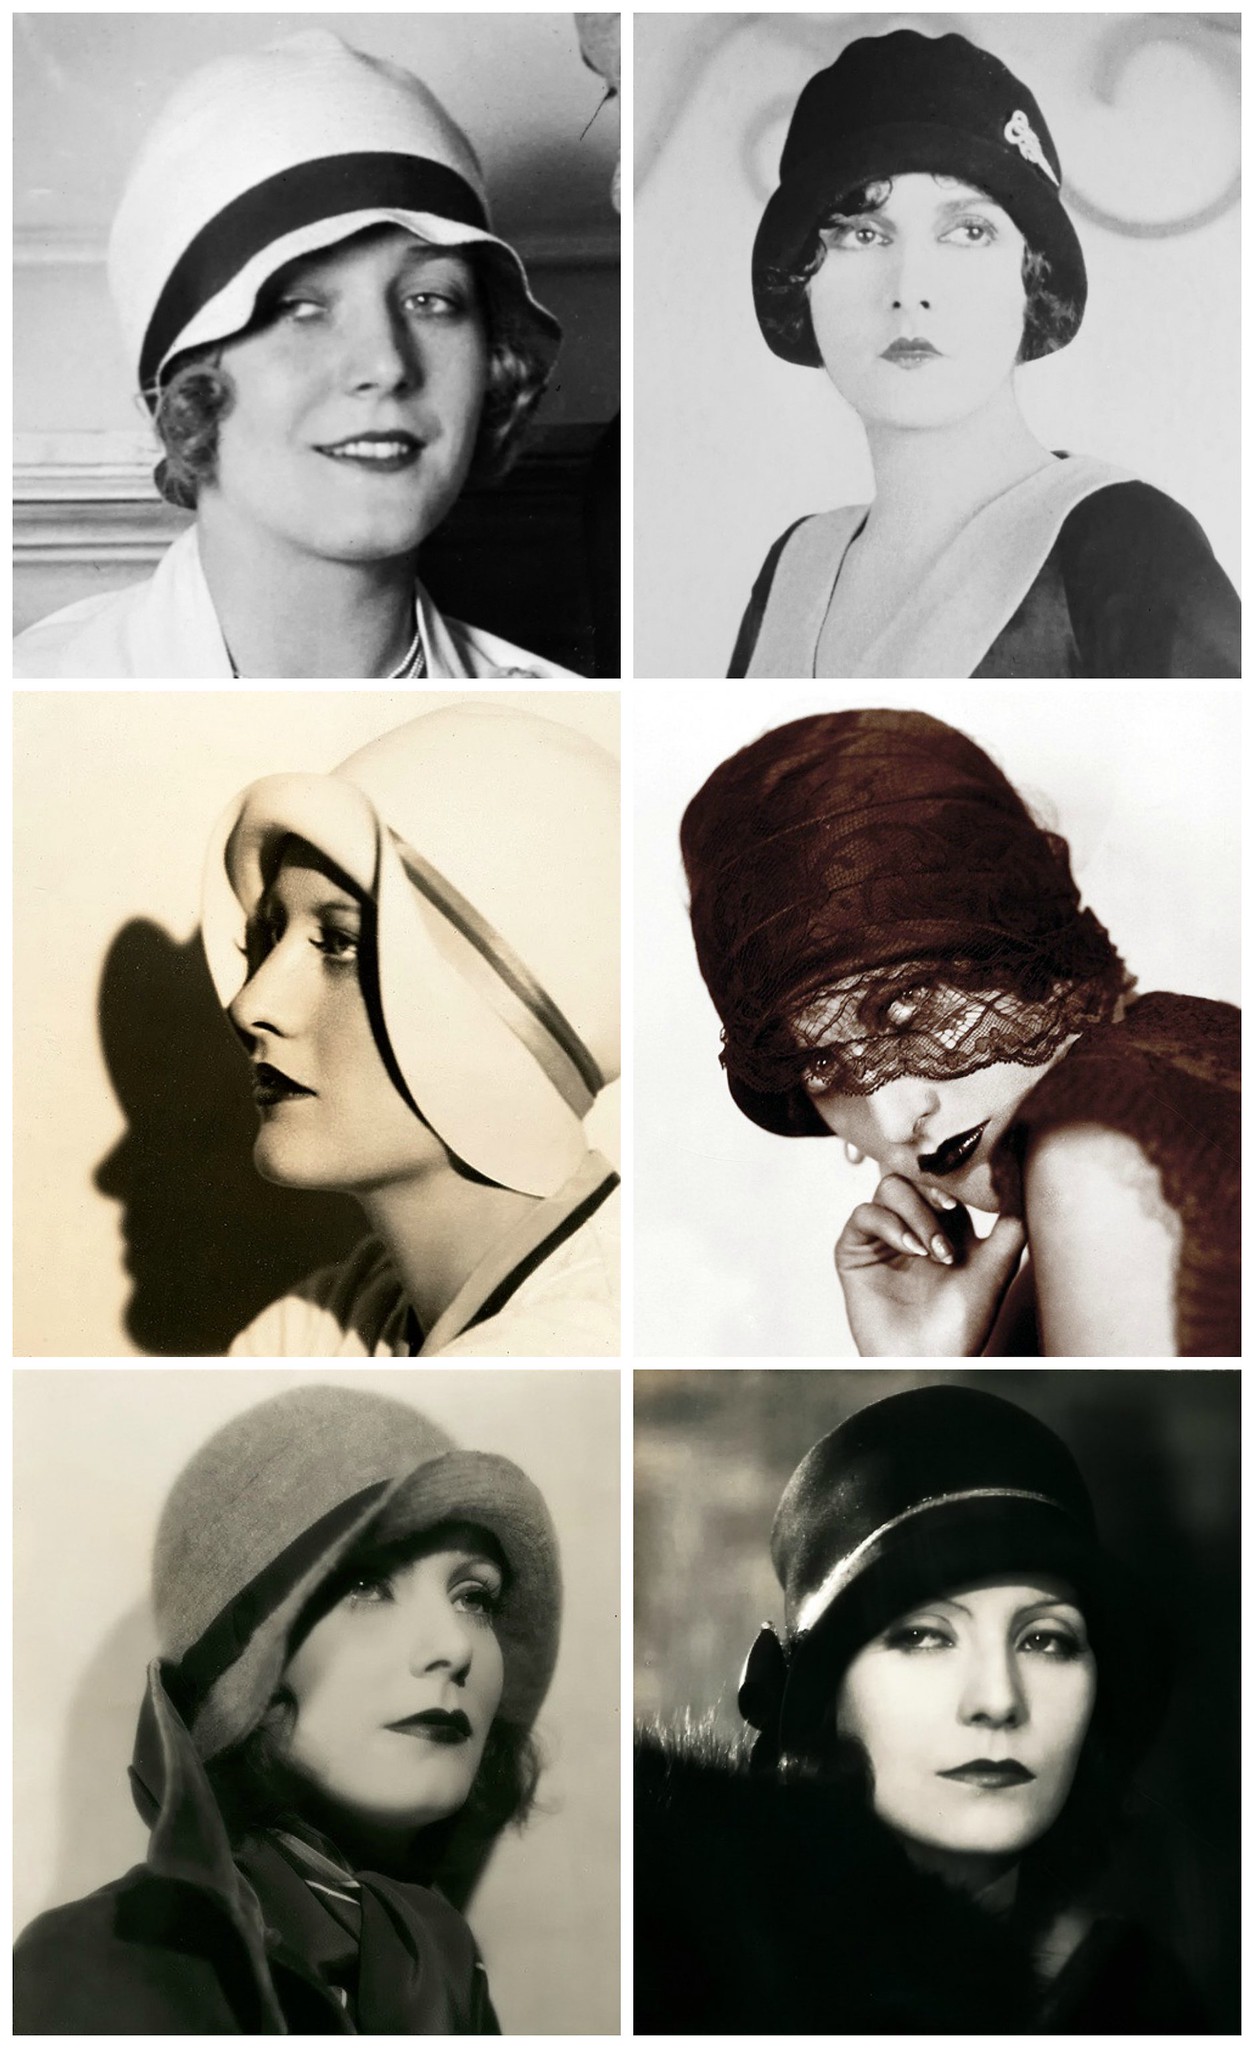 1920s Actresses. Top Row: Vilma Banky, Evelyn Brent; Middle Row: Joan Crawford; Bottom Row: Greta Garbo